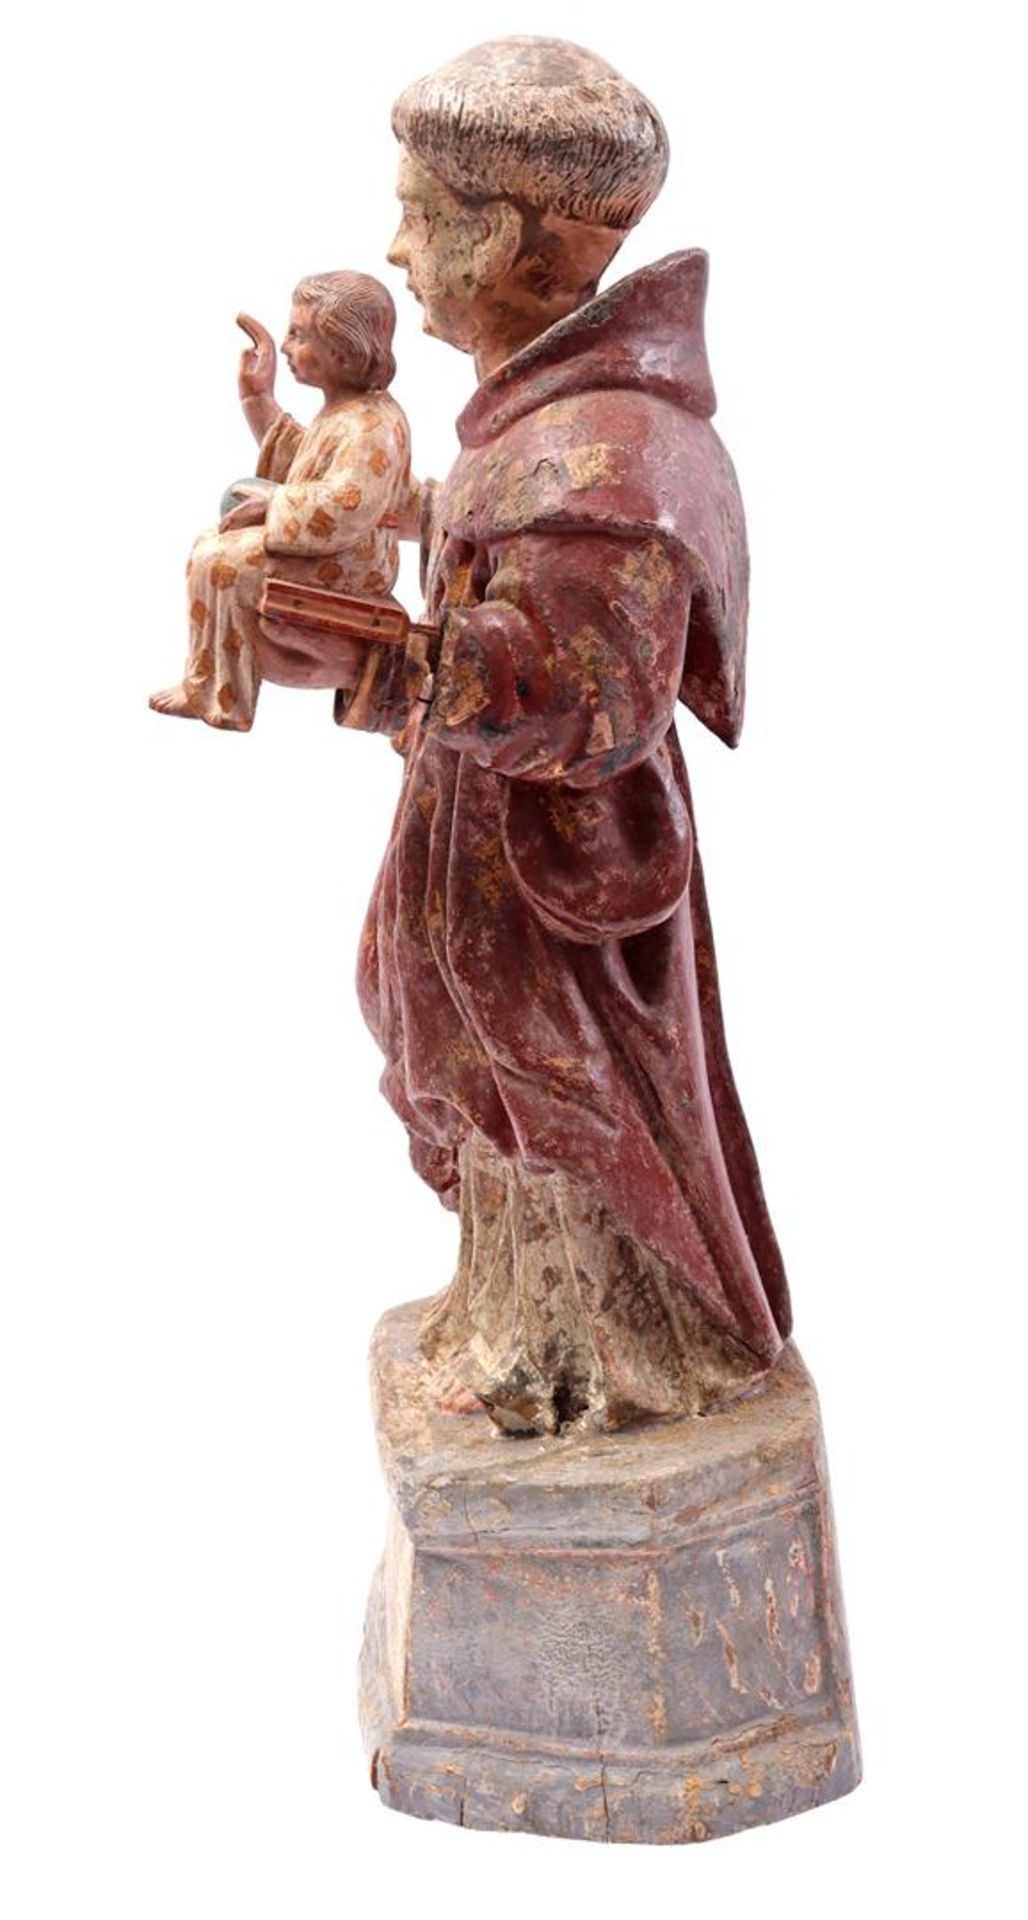 Wooden polychrome statue - Image 3 of 5